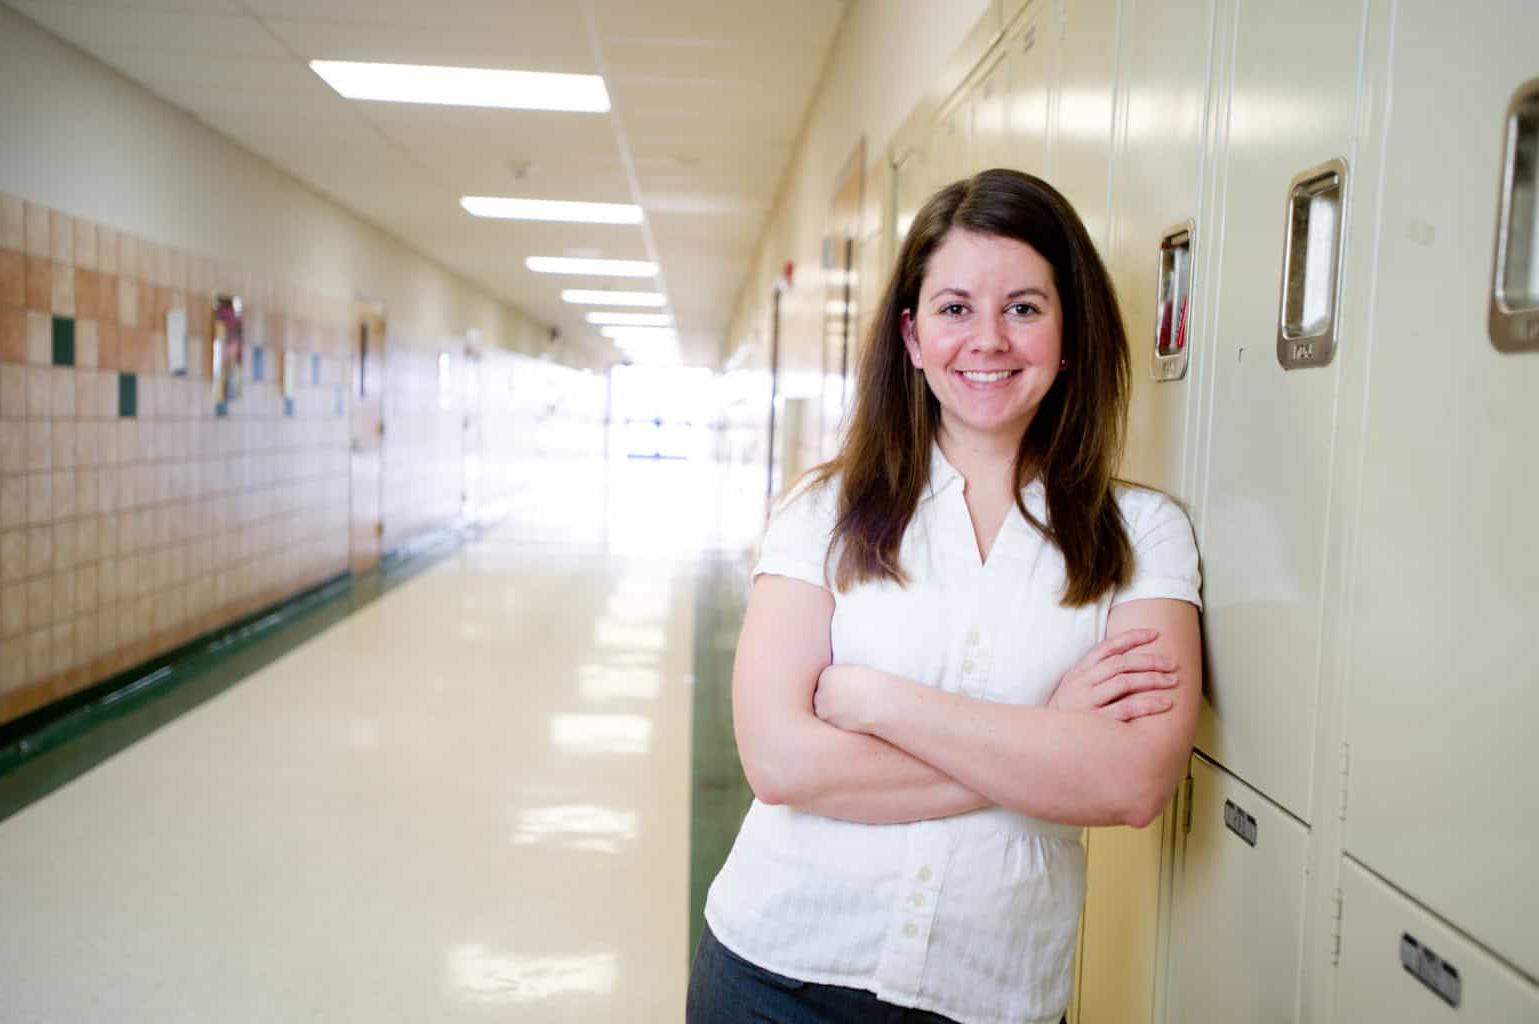 Woman school counselor standing in front of lockers.